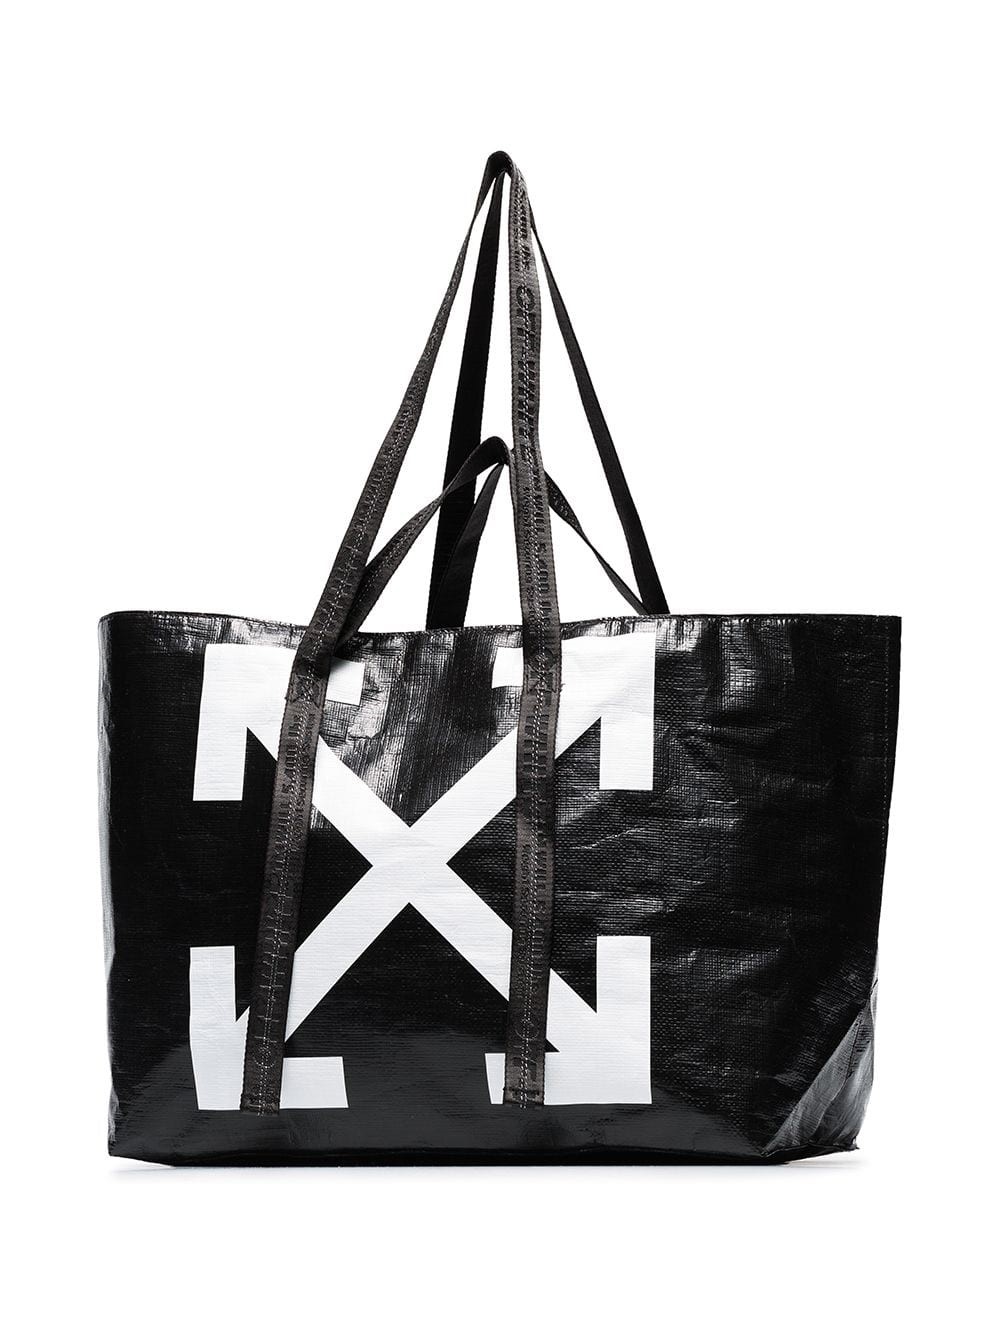 off-white LOGO TOTE BAG available on montiboutique.com - 29945